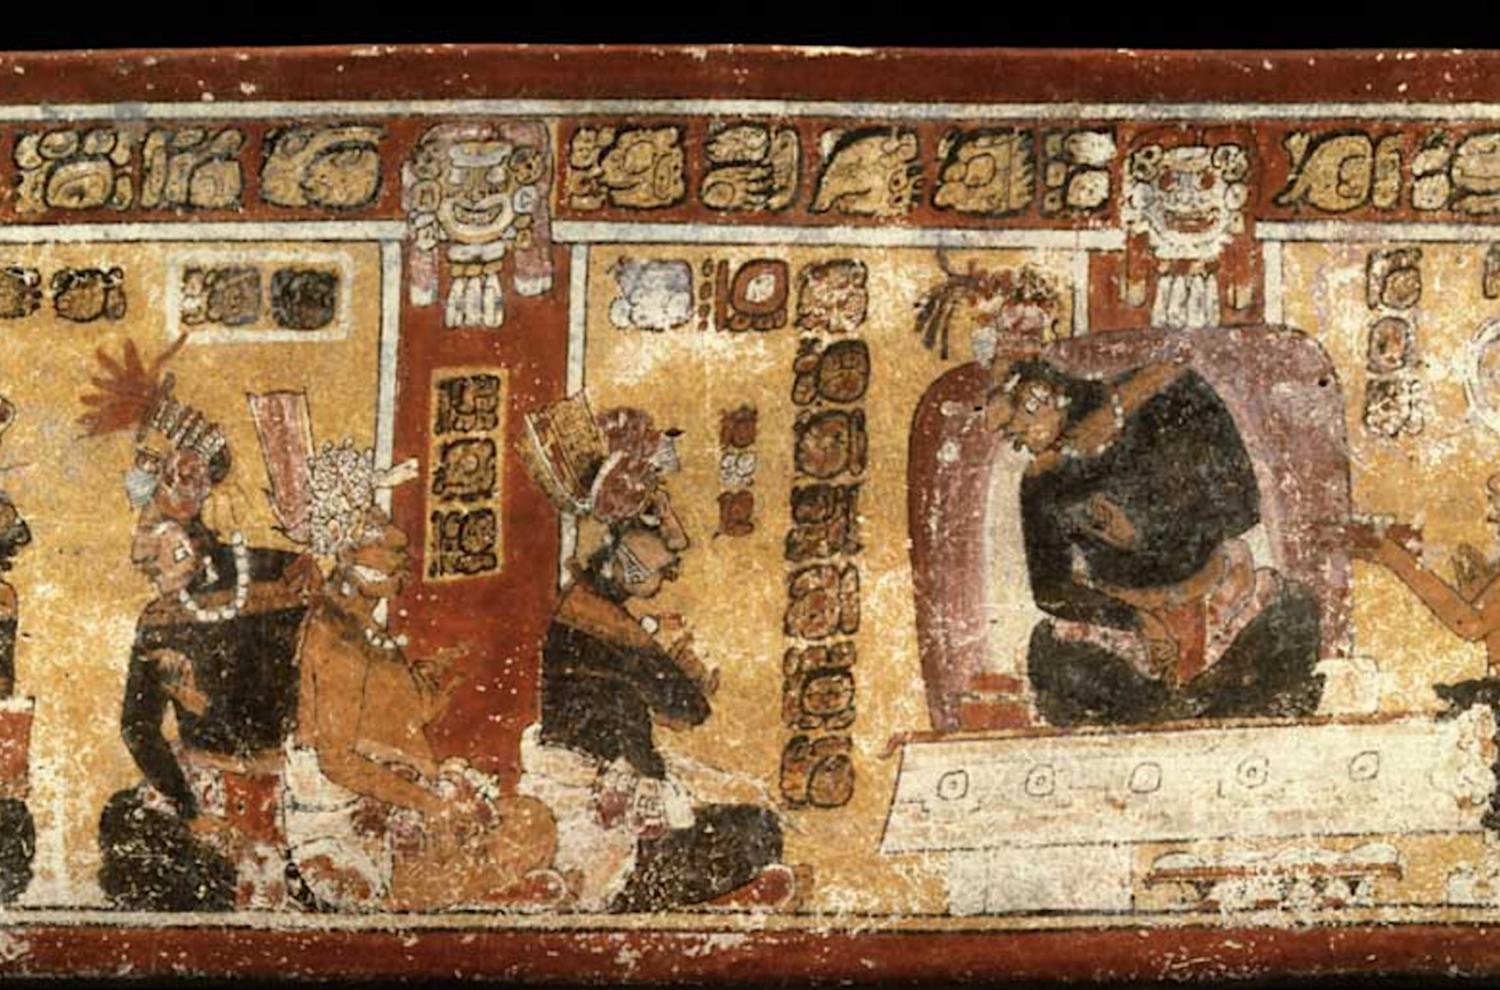 Classic Maya polychrome vase from Dos Pilas showing people covered in black paint. Photo by Justin Kerr, Maya Vase Database.